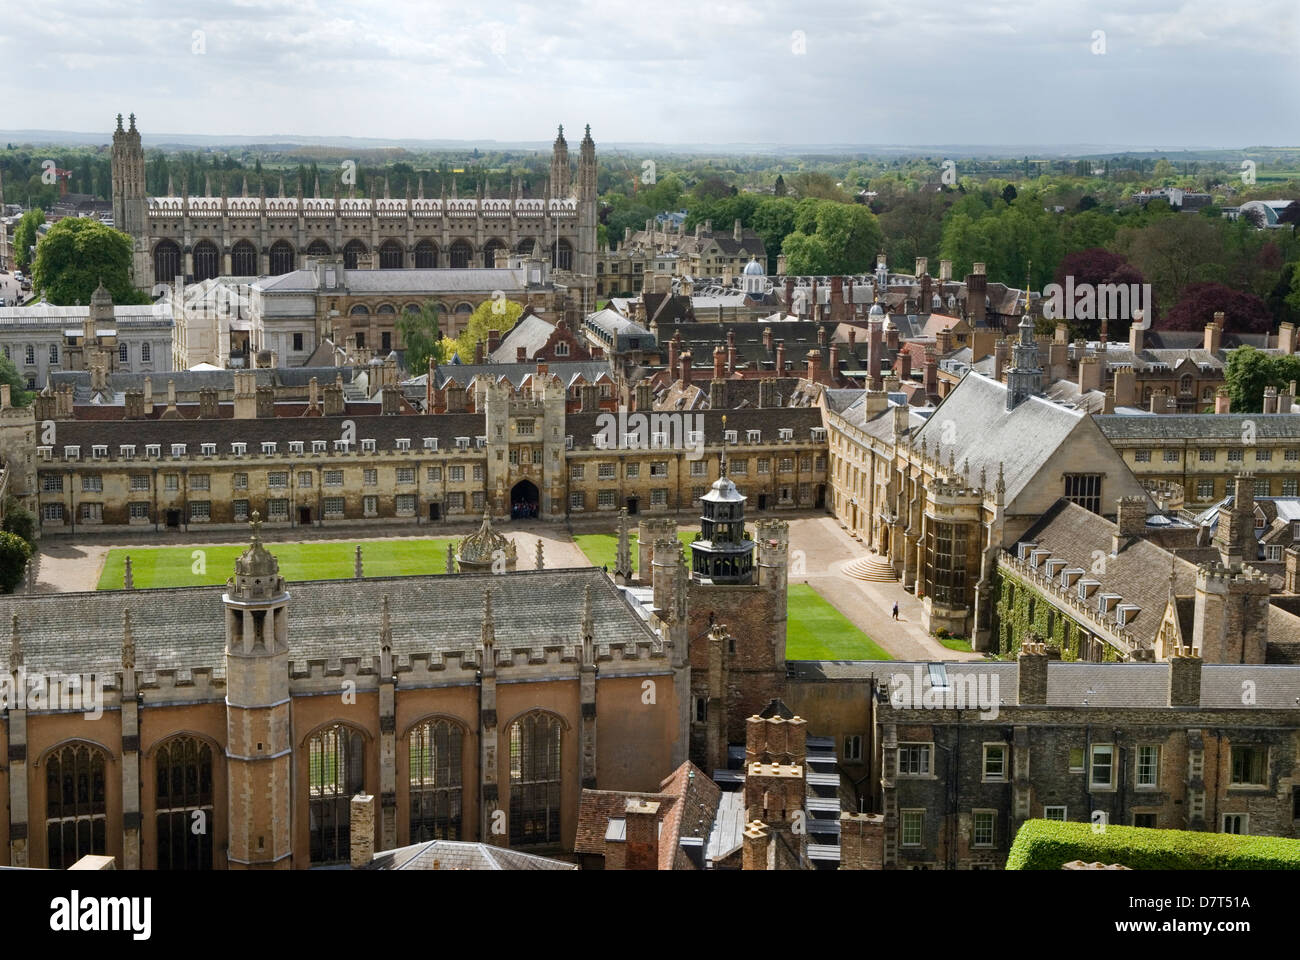 Cambridge University UK Skyline. St Johns College foreground.  Trinity, ( with lawn centre)  Gonville and Caius College commonly referred to as Caius - pronounced as "keys". Kings College. ( large building top left.) 2013 2010s HOMER SYKES Stock Photo